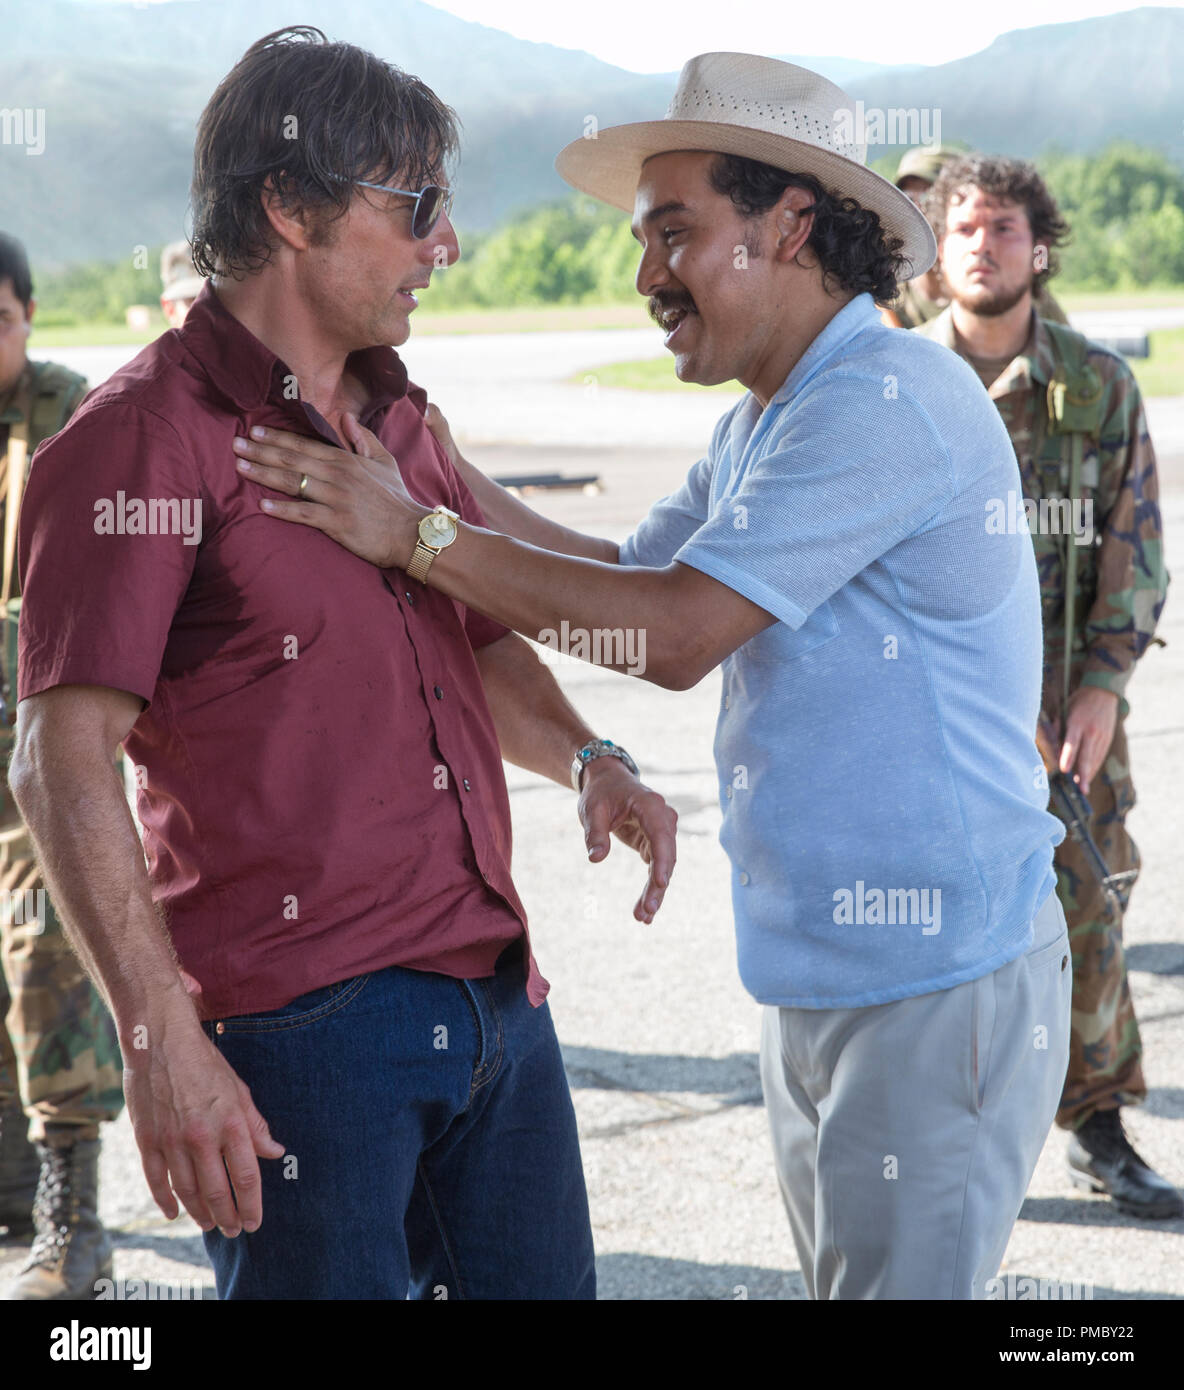 (L to R) Barry Seal (TOM CRUISE) and Jorge Ochoa (ALEJANDRO EDDA) in Universal Pictures' 'American Made.' (2017) Stock Photo